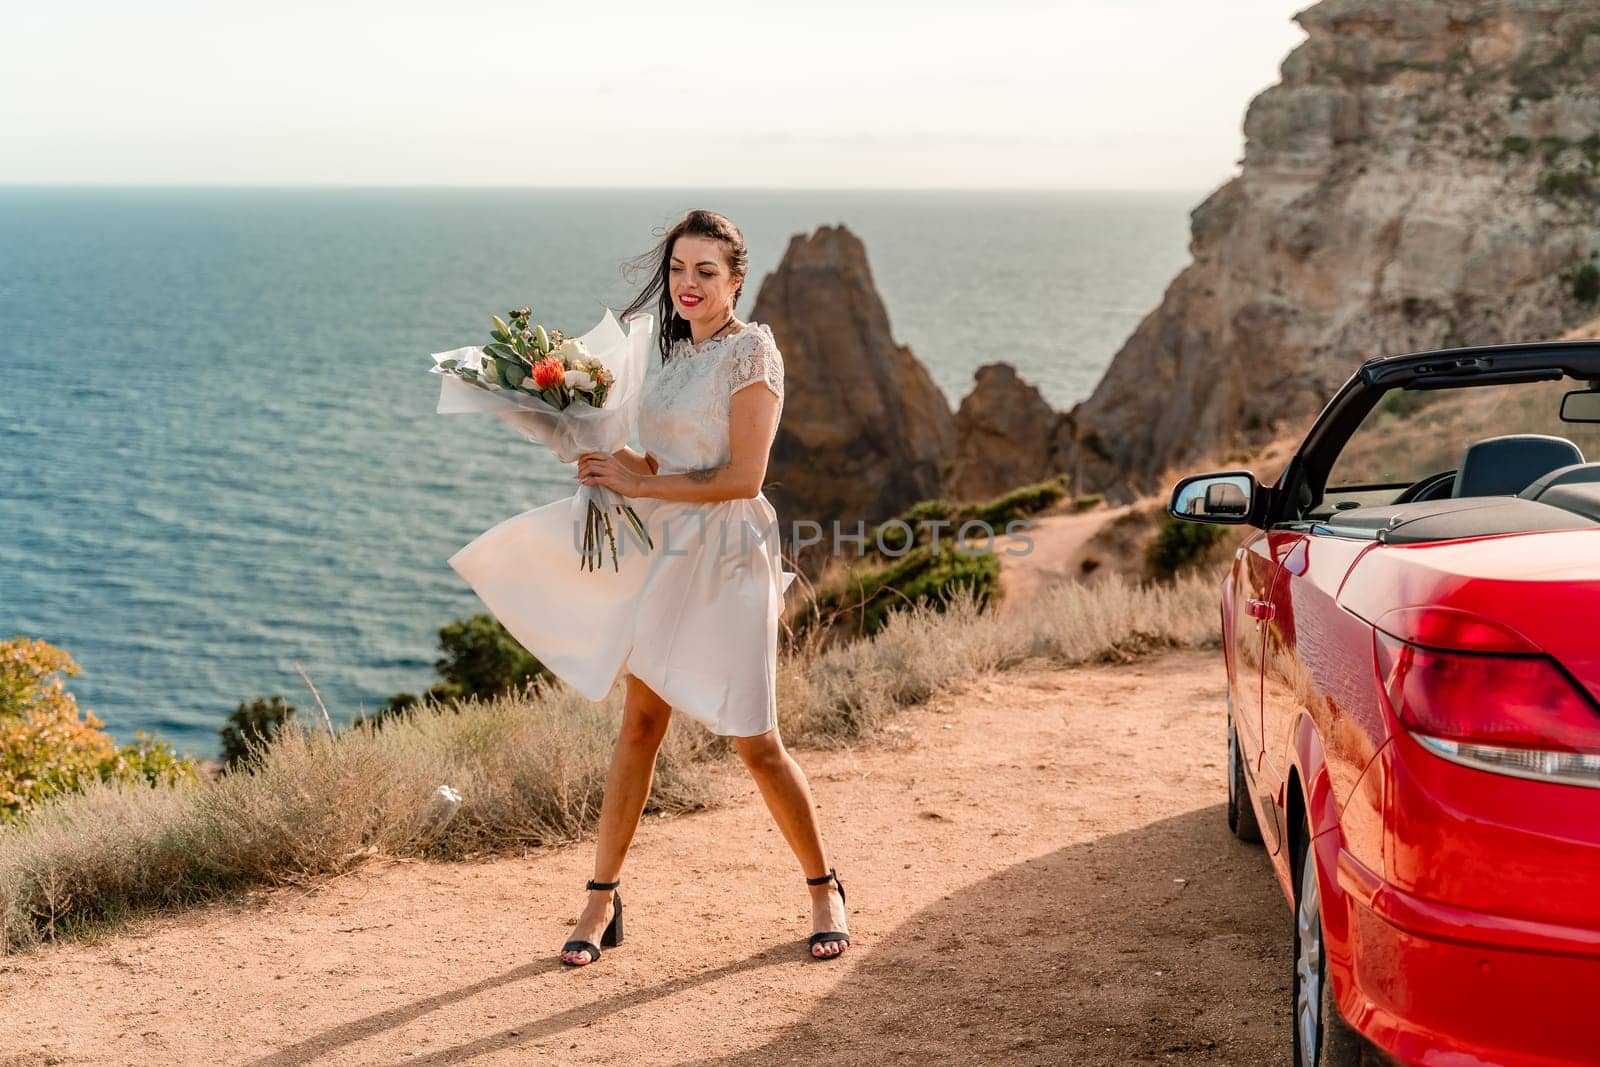 A woman in a white dress is standing next to a red convertible car. She is holding a bouquet of flowers and she is in a happy mood. The scene suggests a romantic or special occasion. by Matiunina